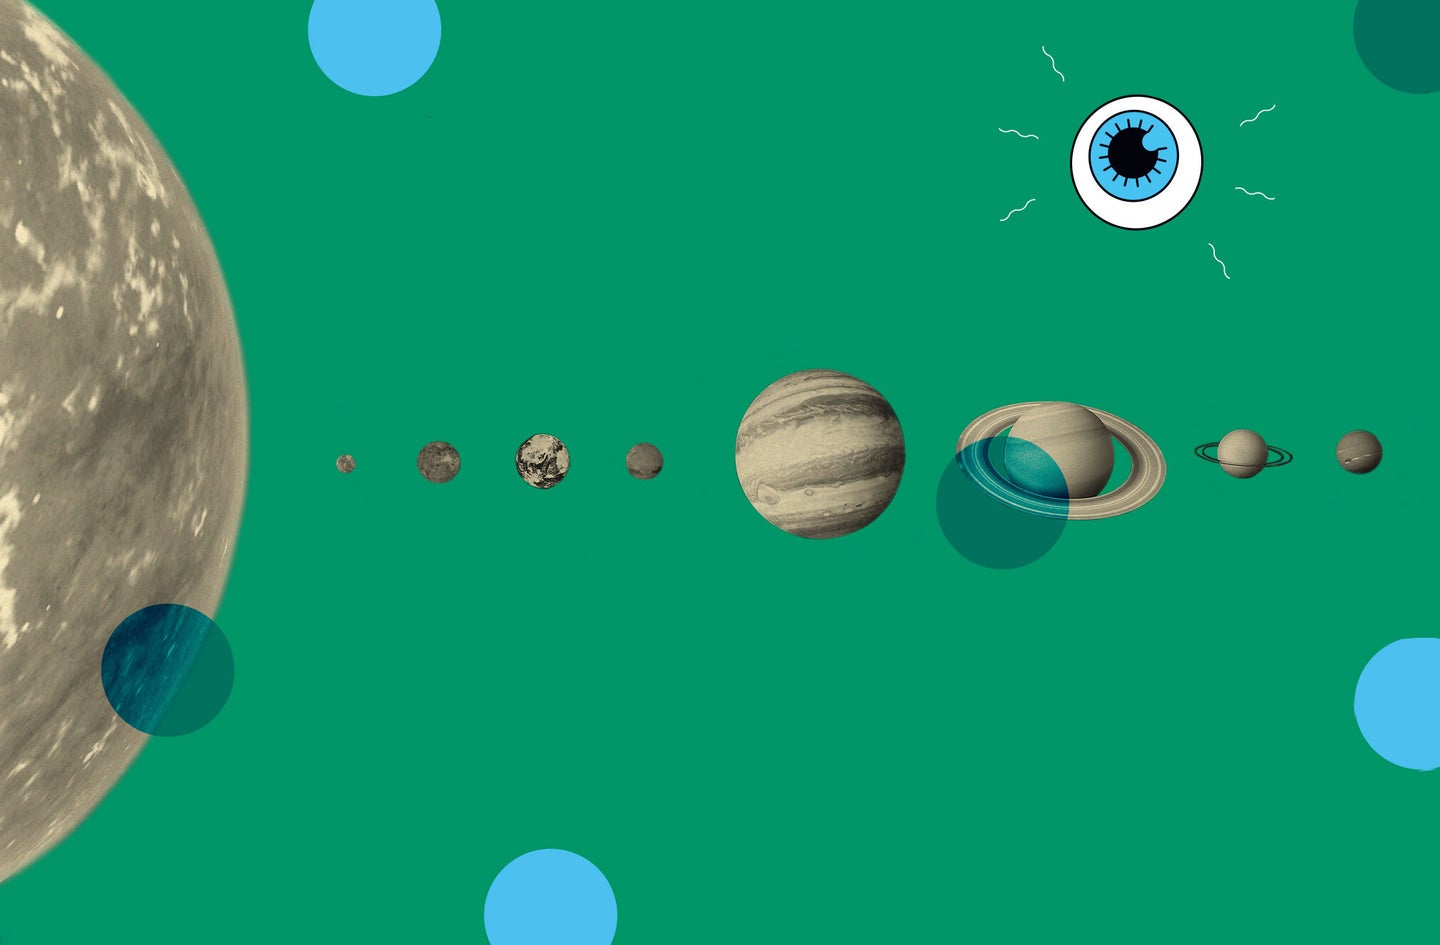 planets lined up over an art illustration